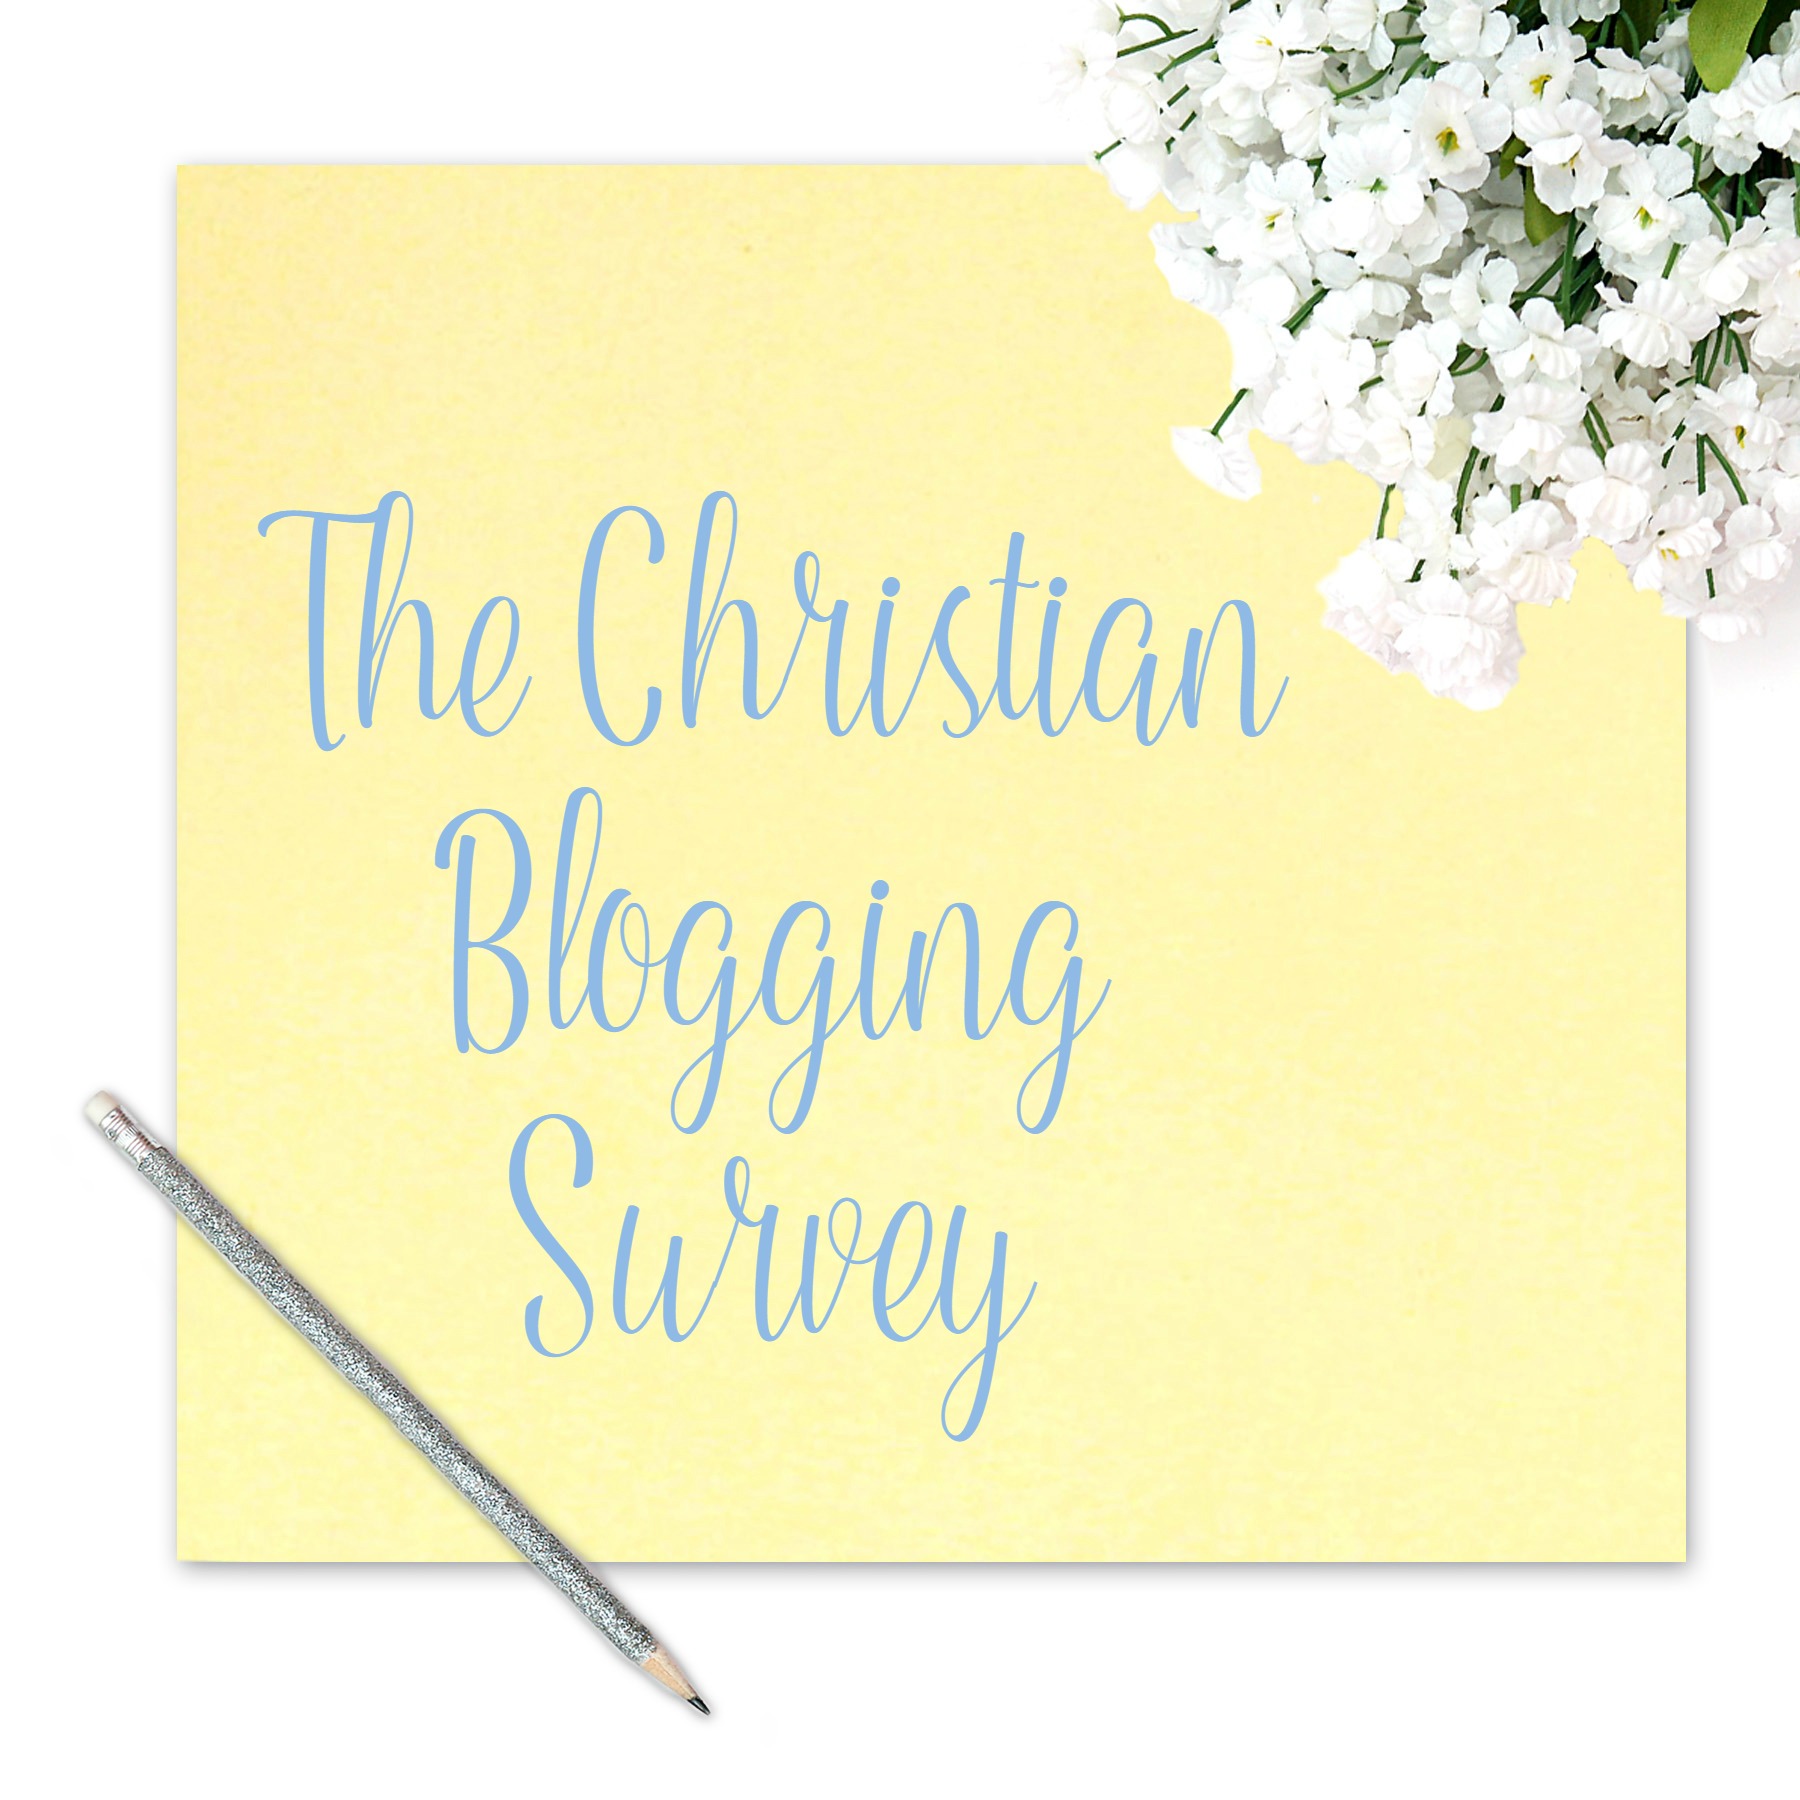 Calling all faith-based bloggers! I'm looking for 1000 bloggers to share what their biggest struggles and pain points are. A summary of the confidential and anonymous results will be shared with anyone who wants them!